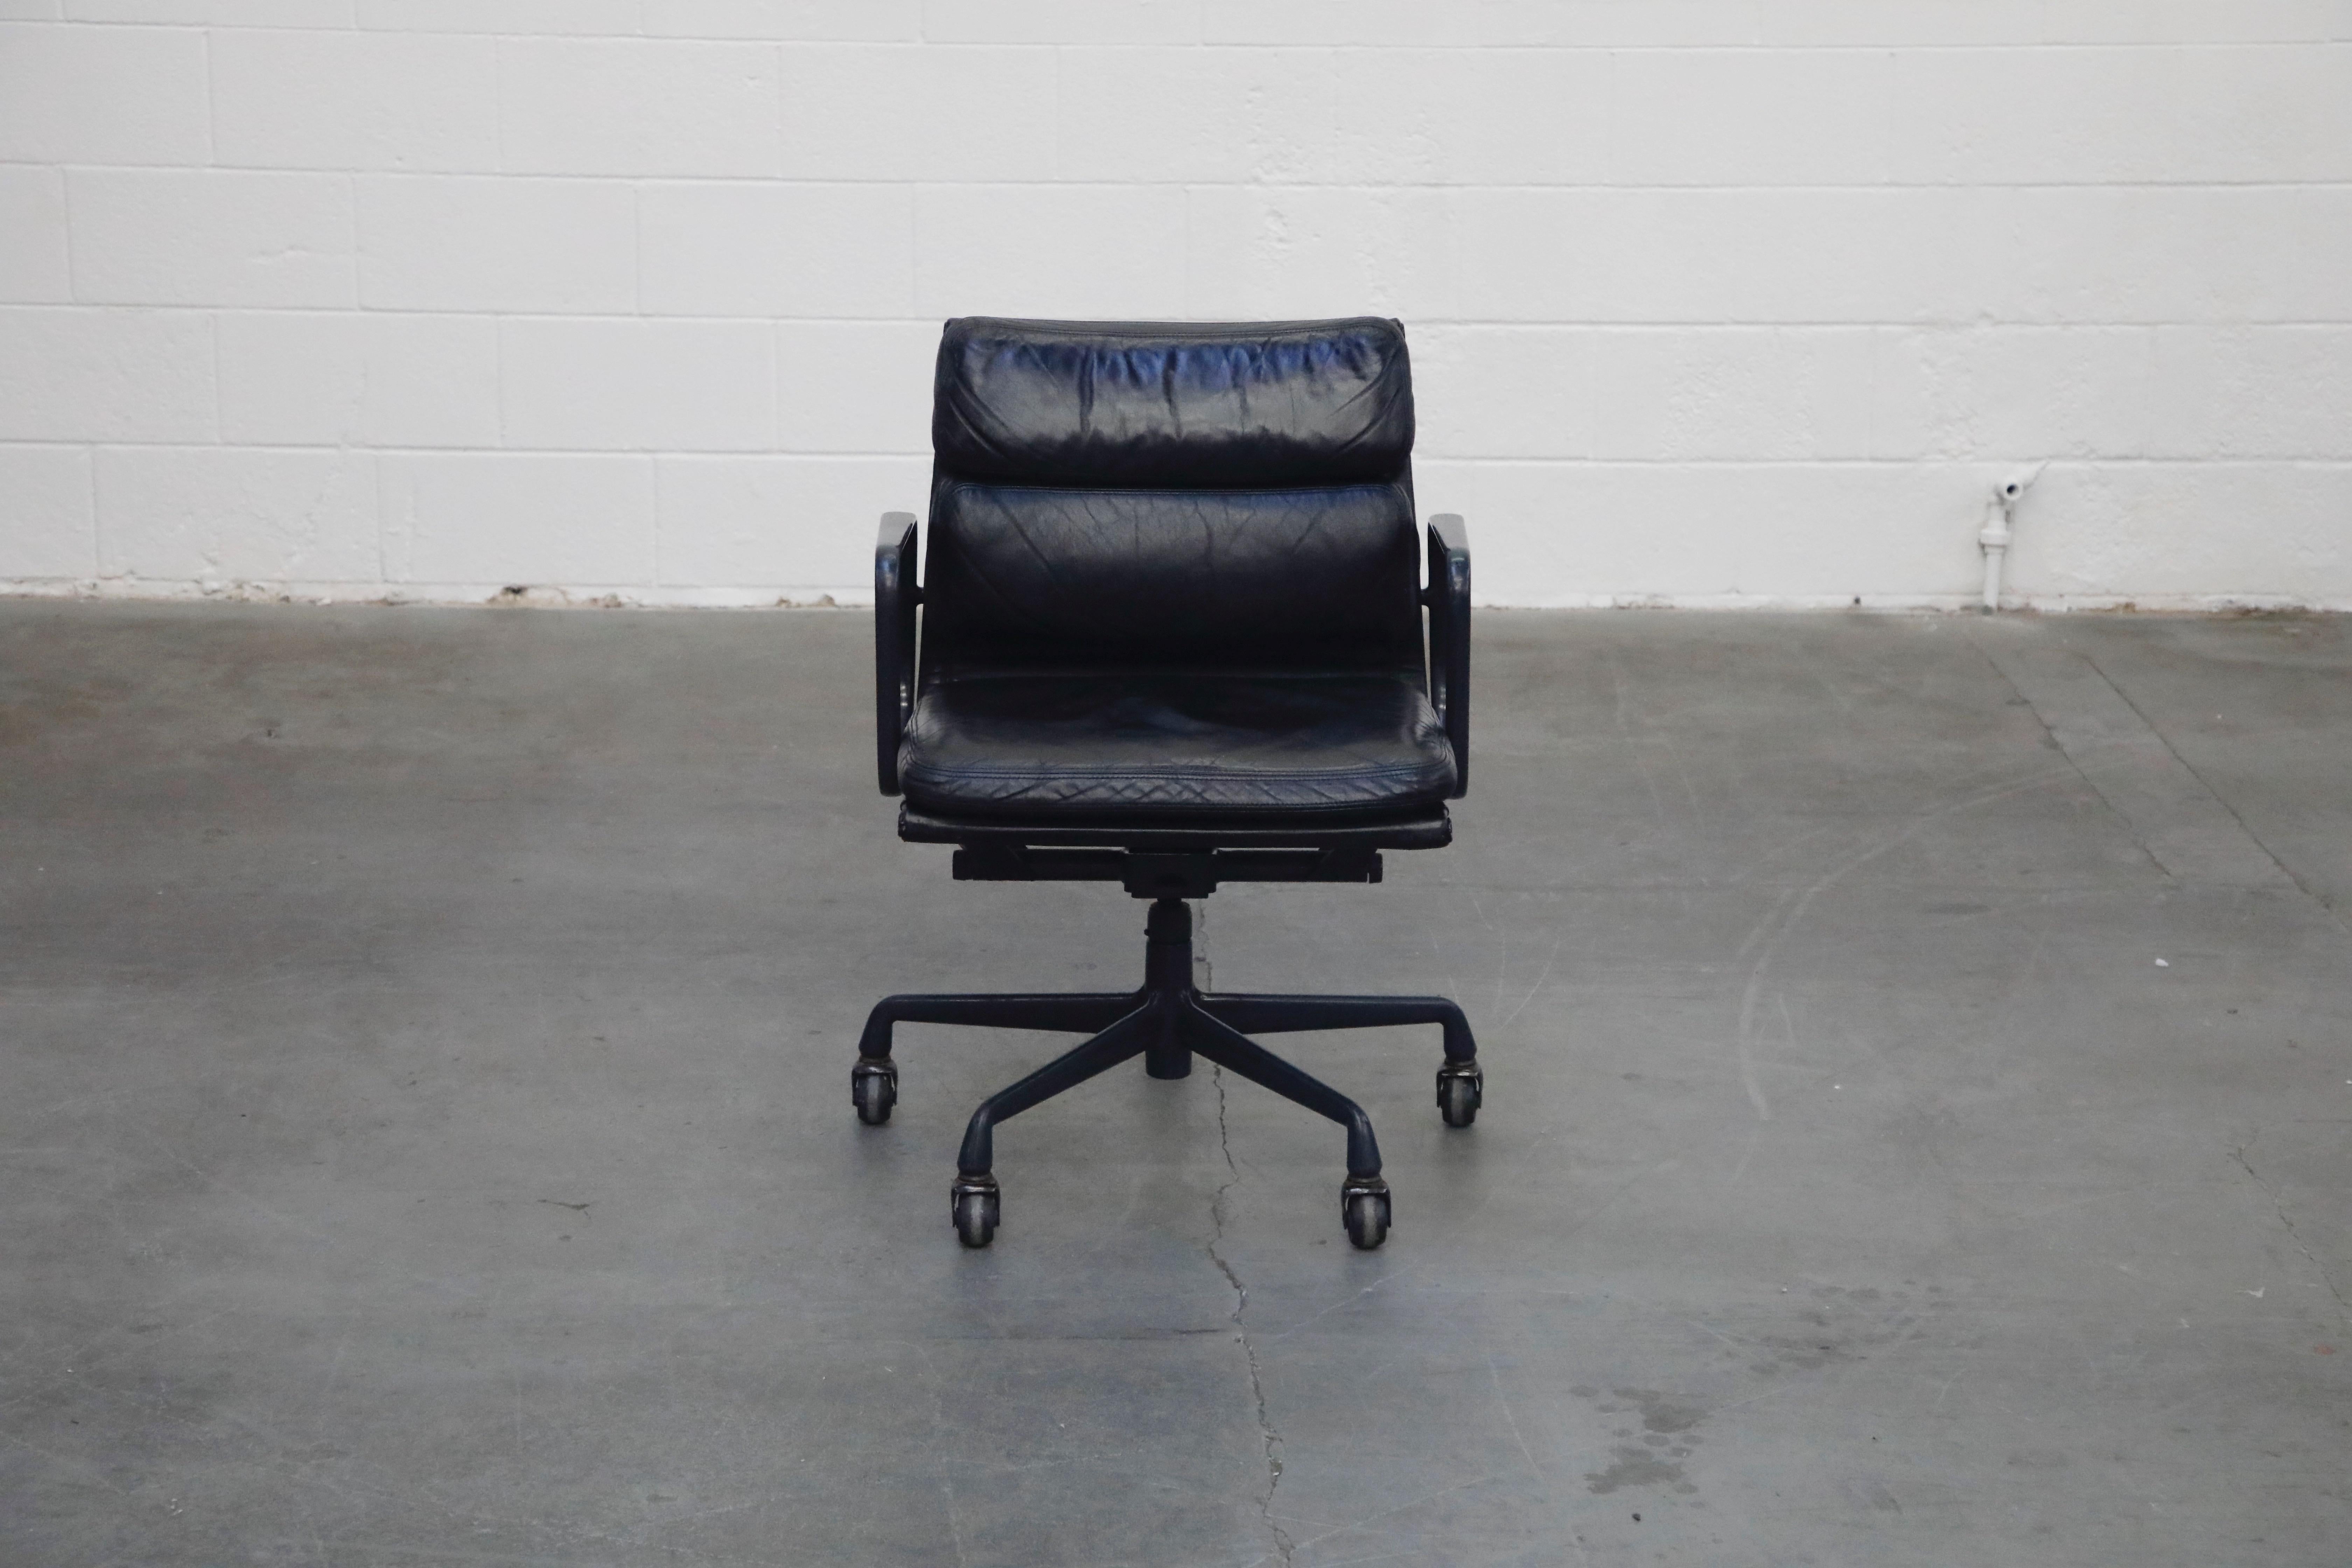 A rare colorway black leather on black frame soft pad management chair, dated 1992 - the same great year that brought us 'Aladdin', 'Wayne's World' and 'Basic Instinct' . This sought after leather 'Soft Pad' management desk chair is from the